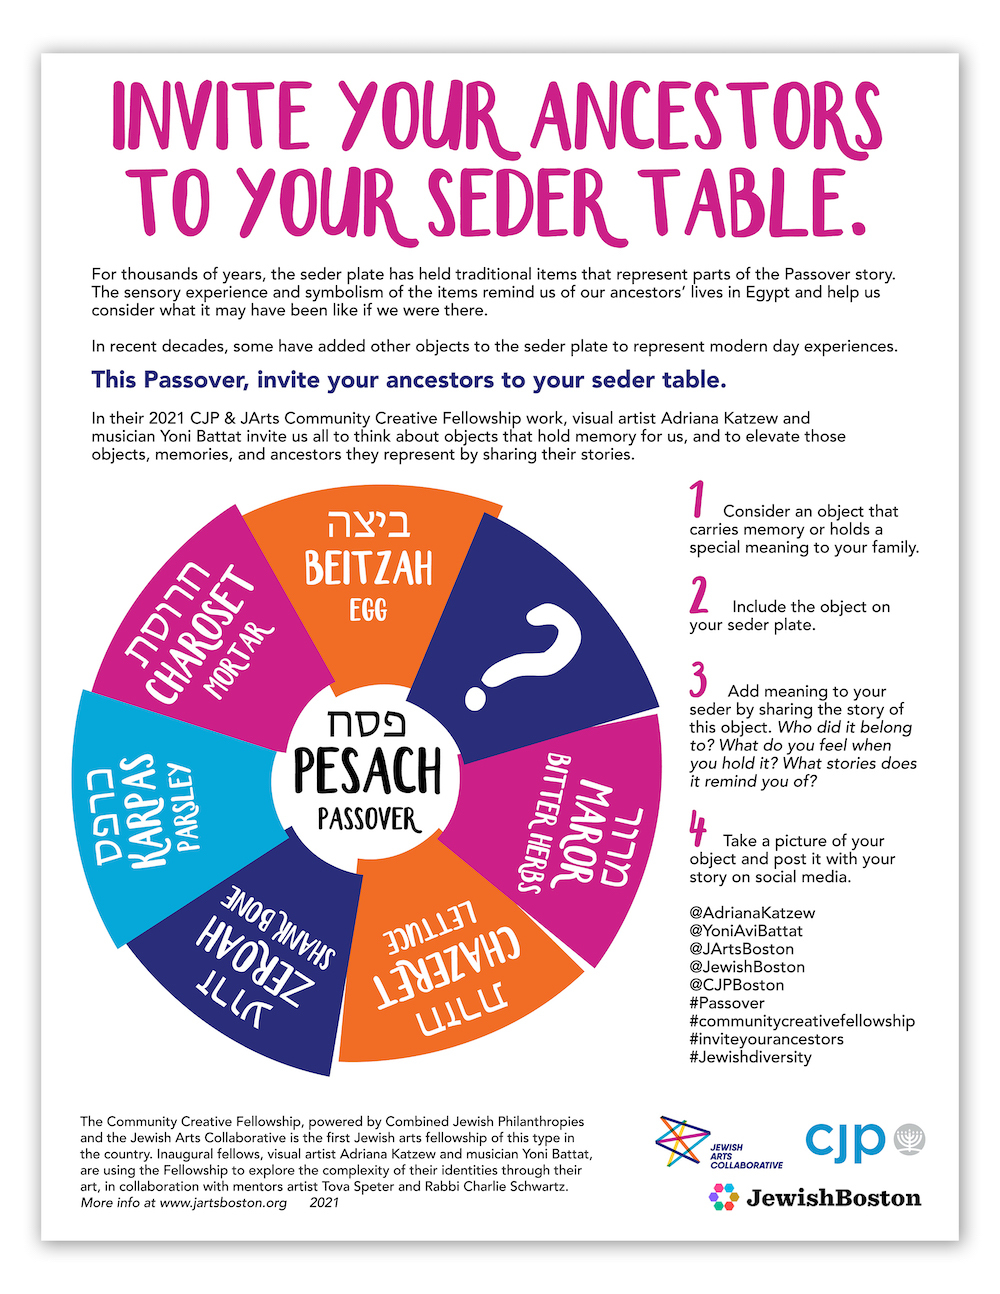 Invite Your Ancestors to Your Seder Table